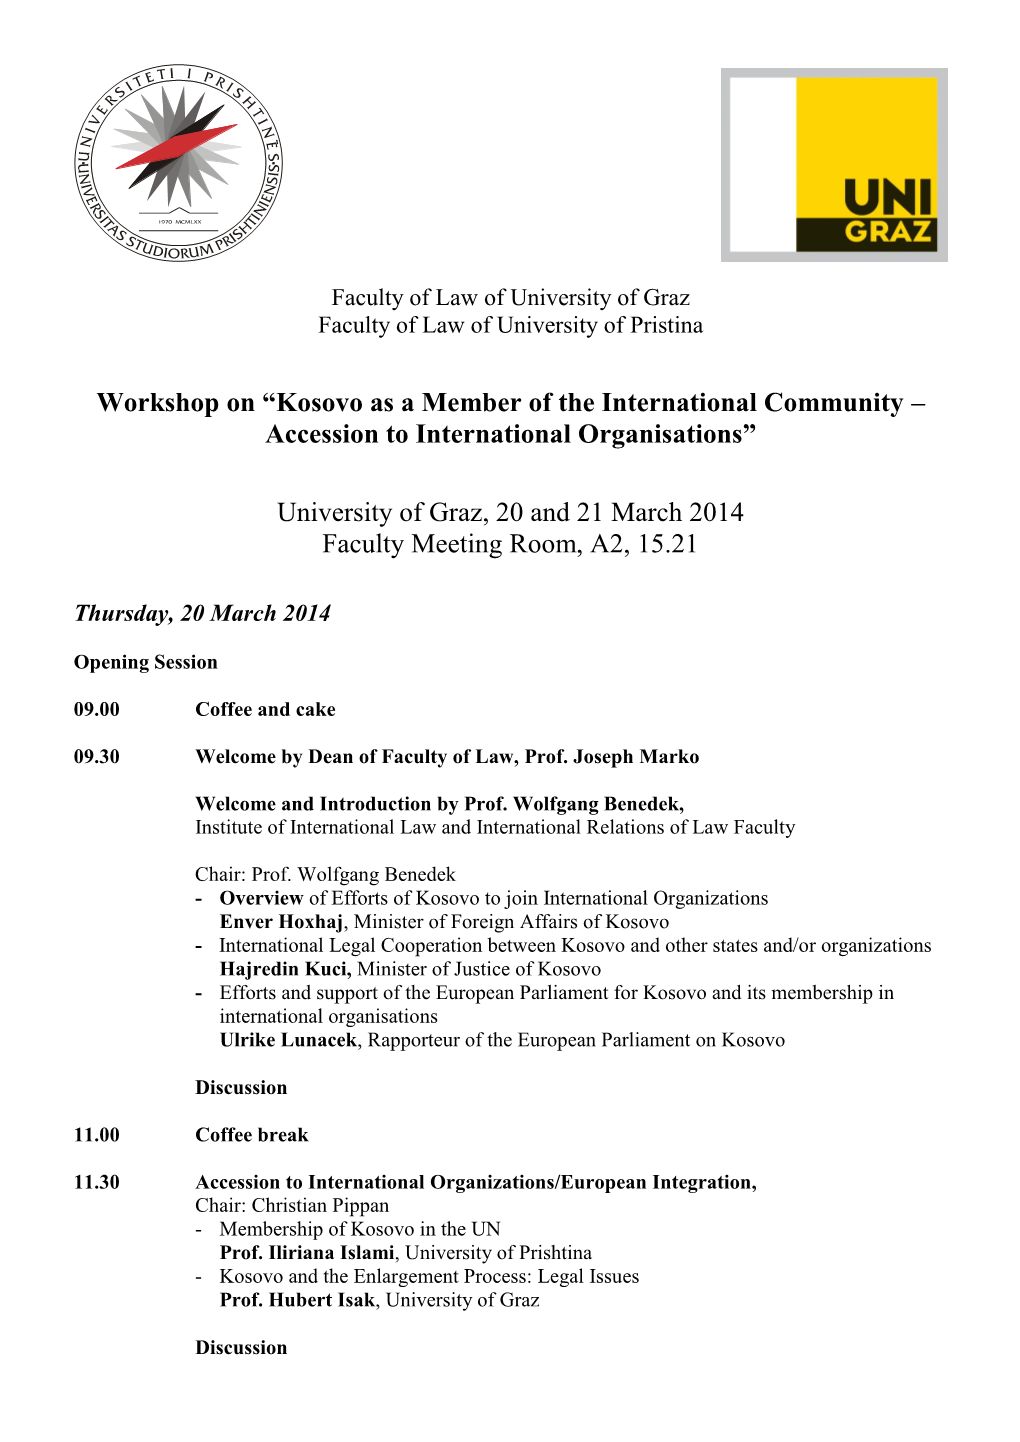 Workshop on “Kosovo As a Member of the International Community – Accession to International Organisations”